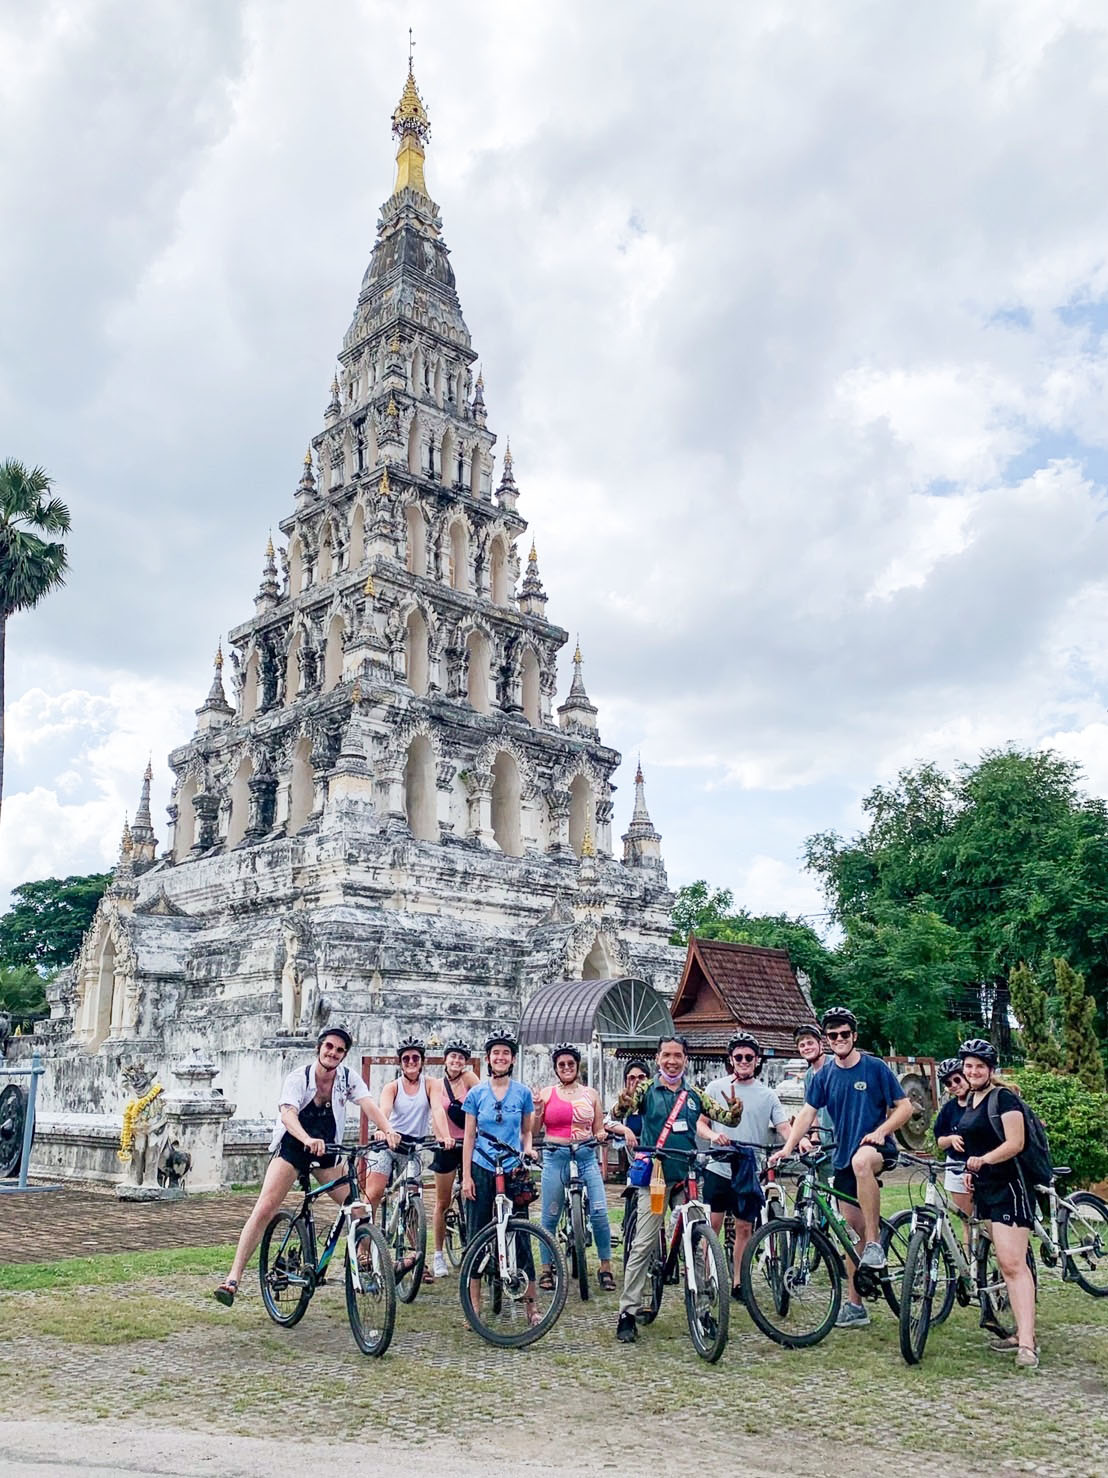 Students on a bike tour of Chiang Mai, Thailand.